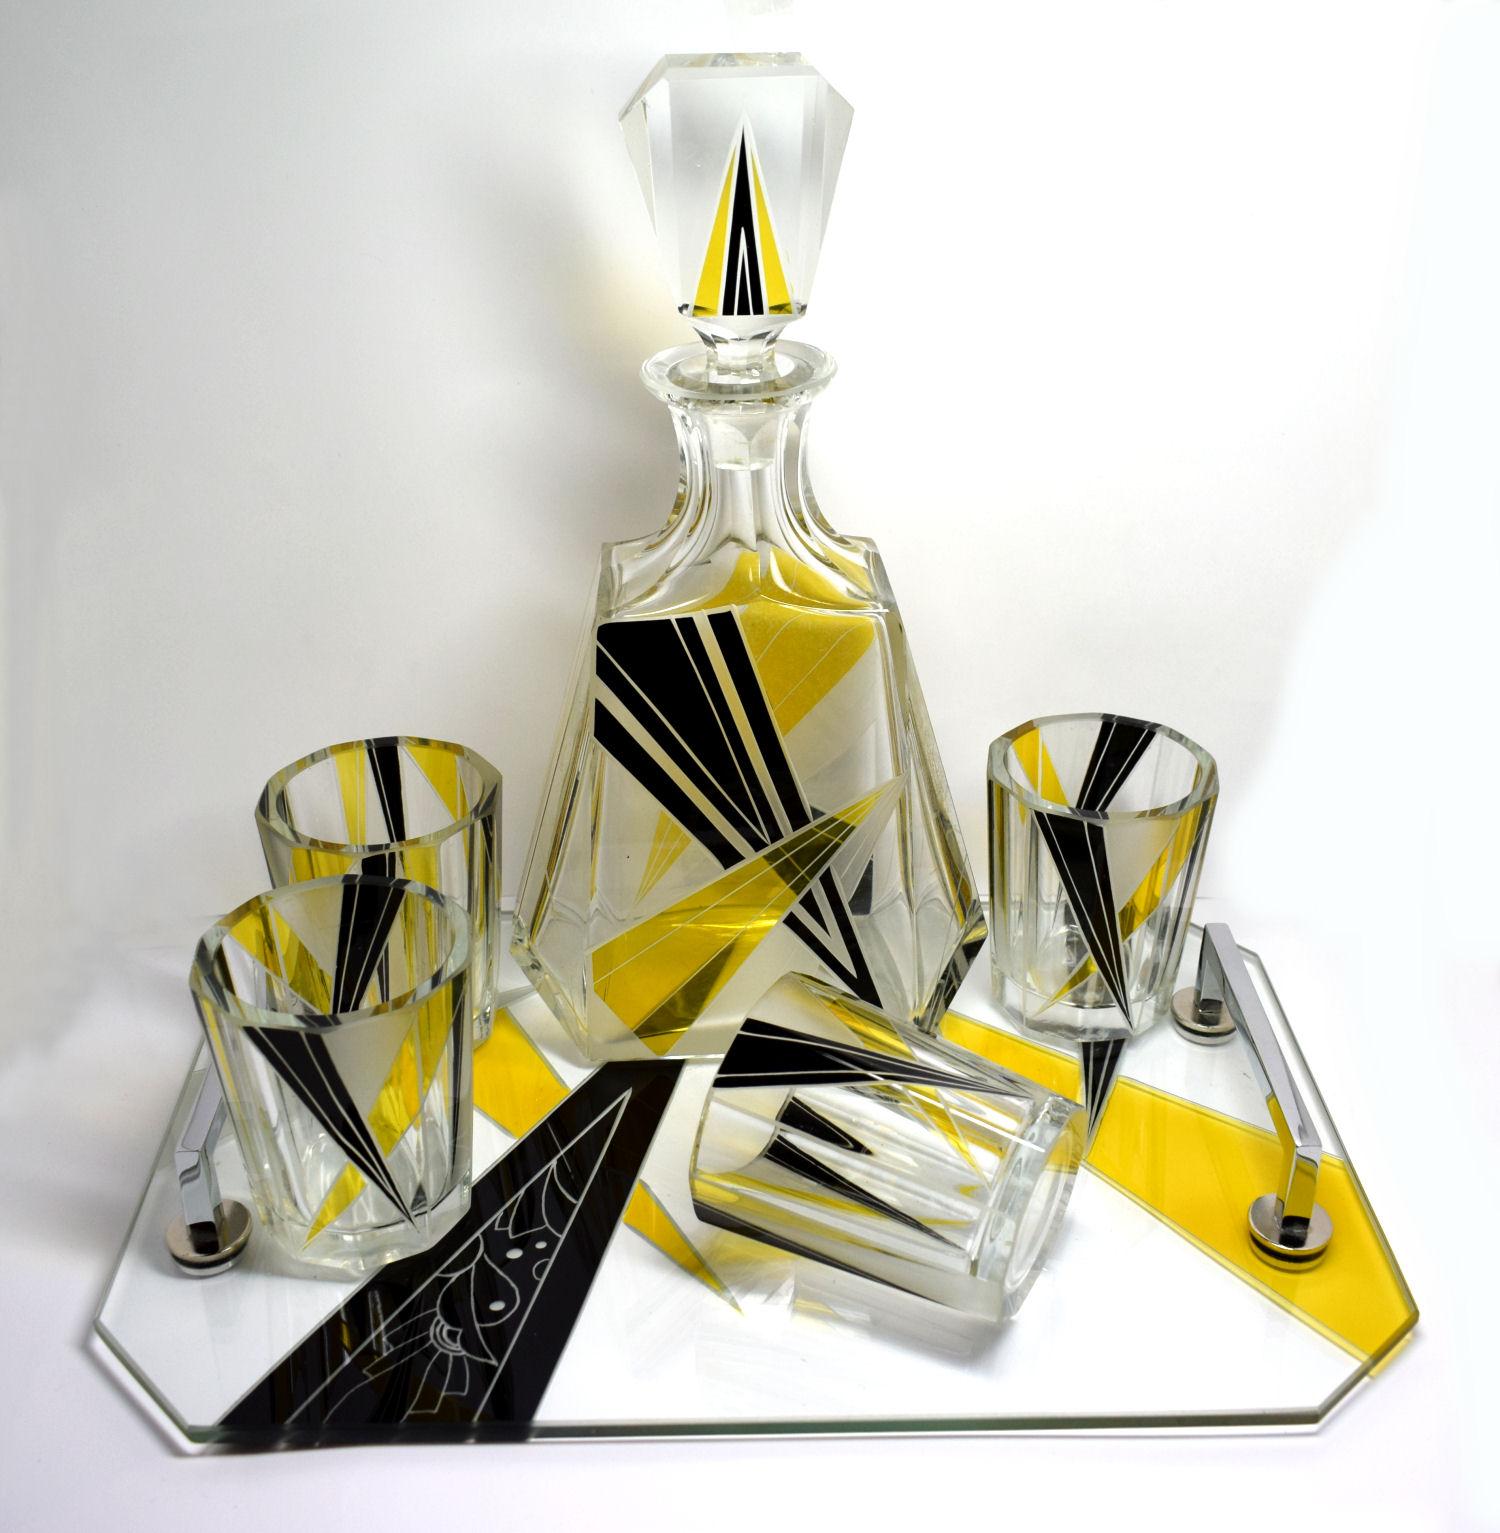 Very high quality, collectable 1930s Art Deco Czech whisky decanter set. Features a classic shape decanter with six decent sized glass tumblers with matching tray. These classic sets are rare and a beautiful addition to any Deco collection. No